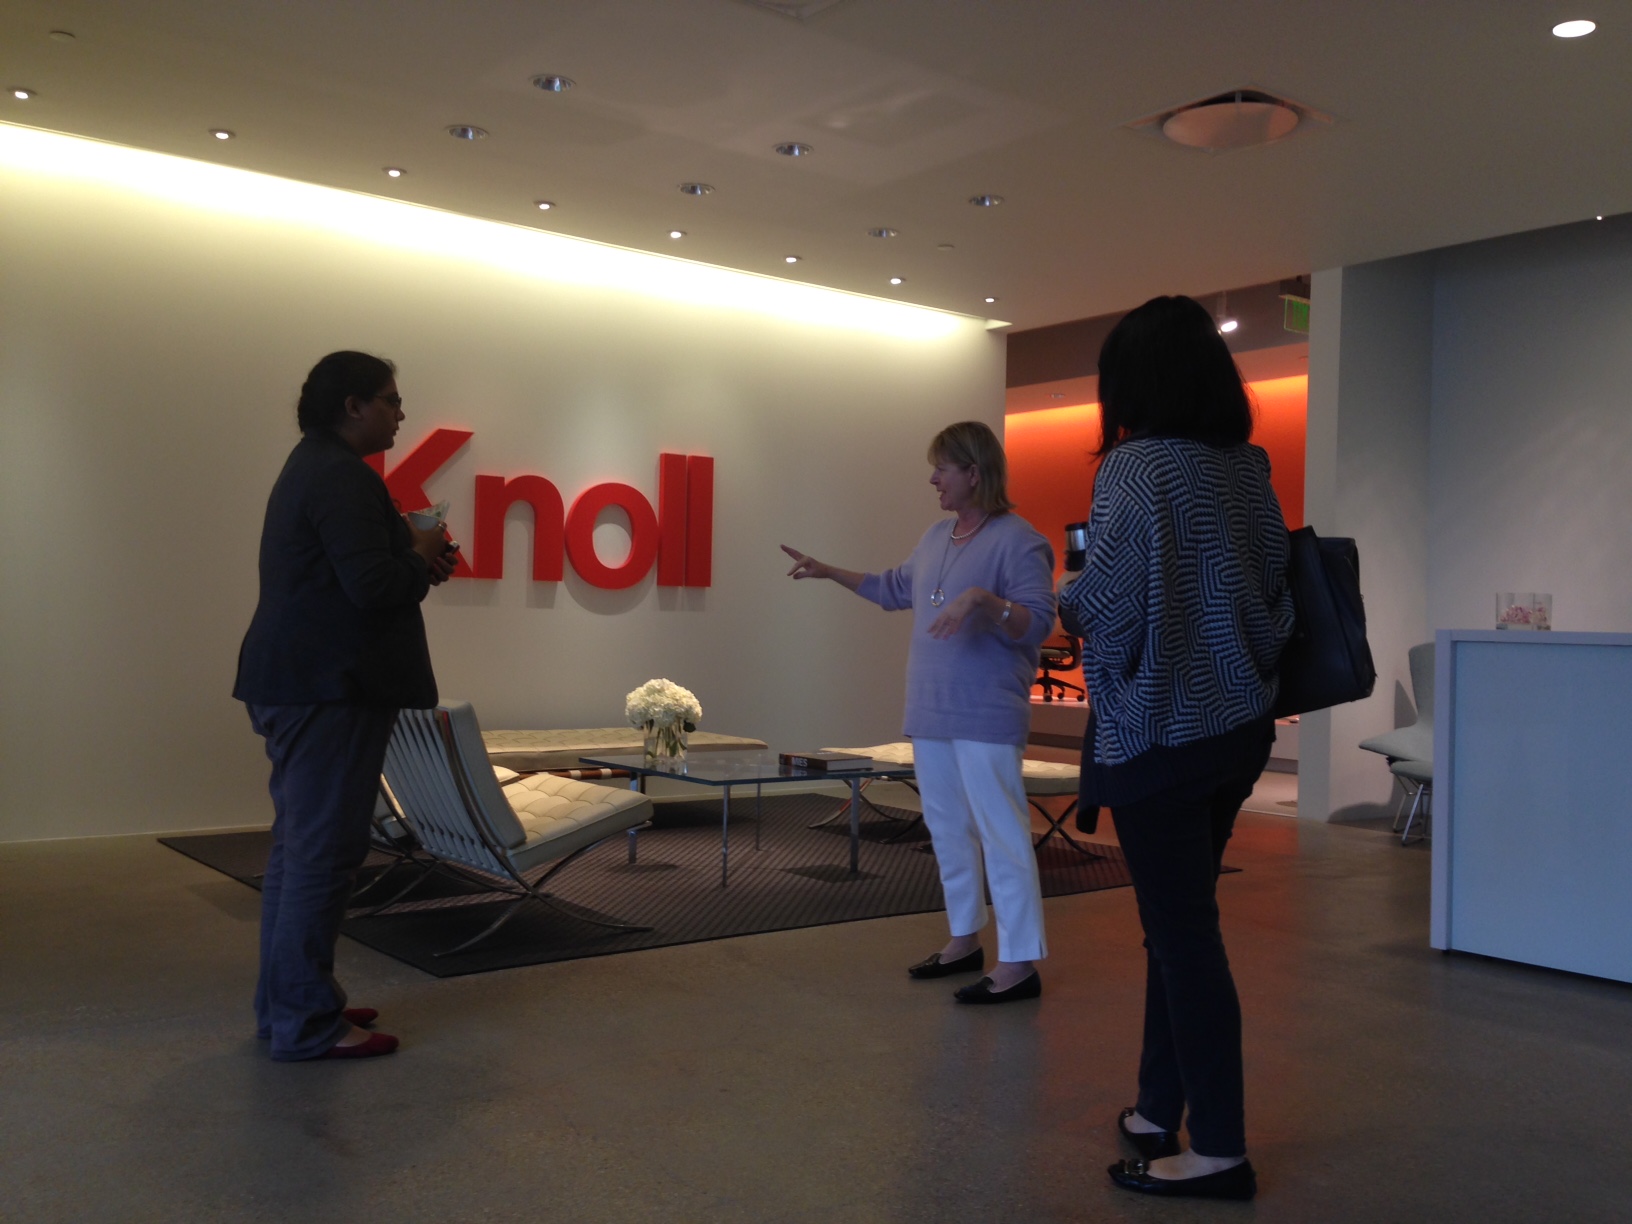 Student Mentoring: Historical Perspective at Knoll